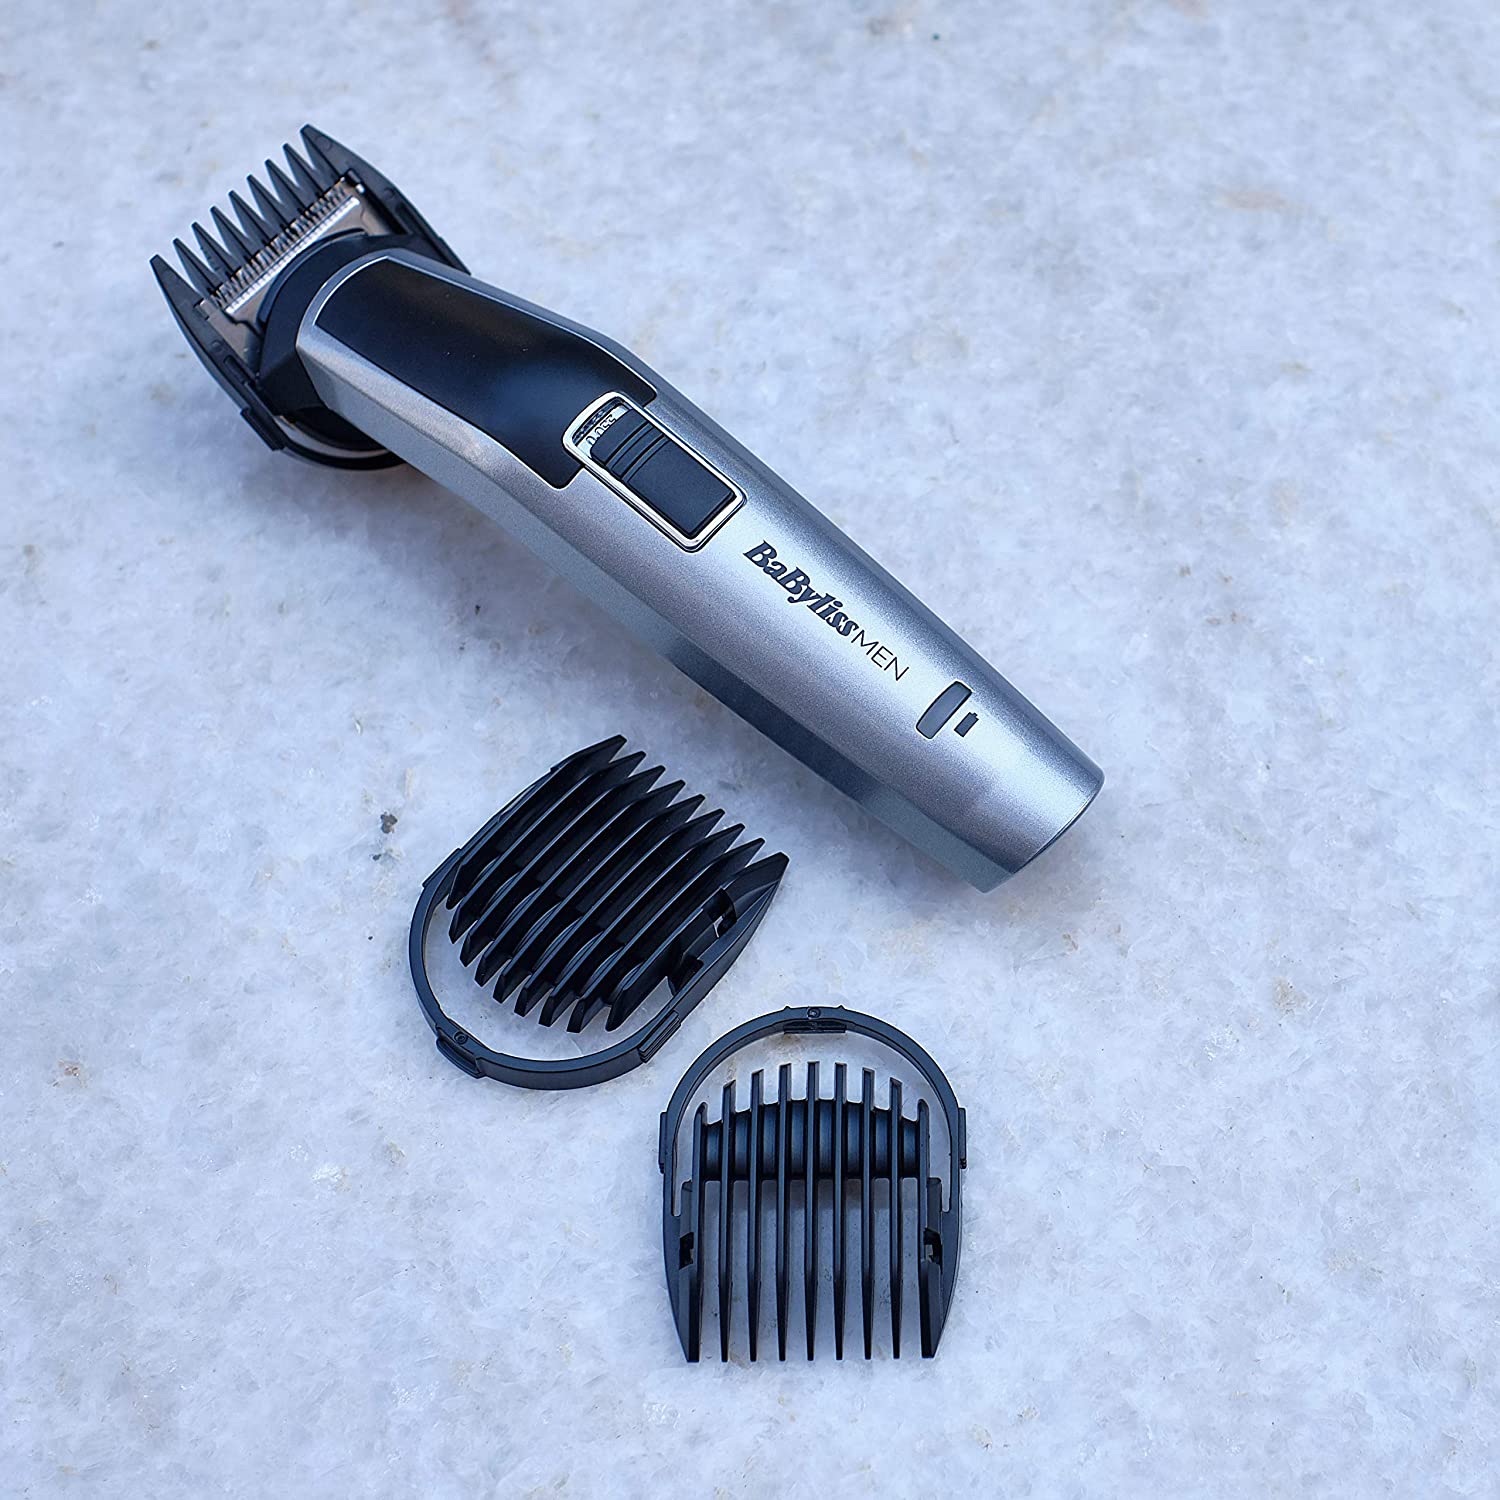 BABYLISS MT728E MULTI TRIMMER 10IN1